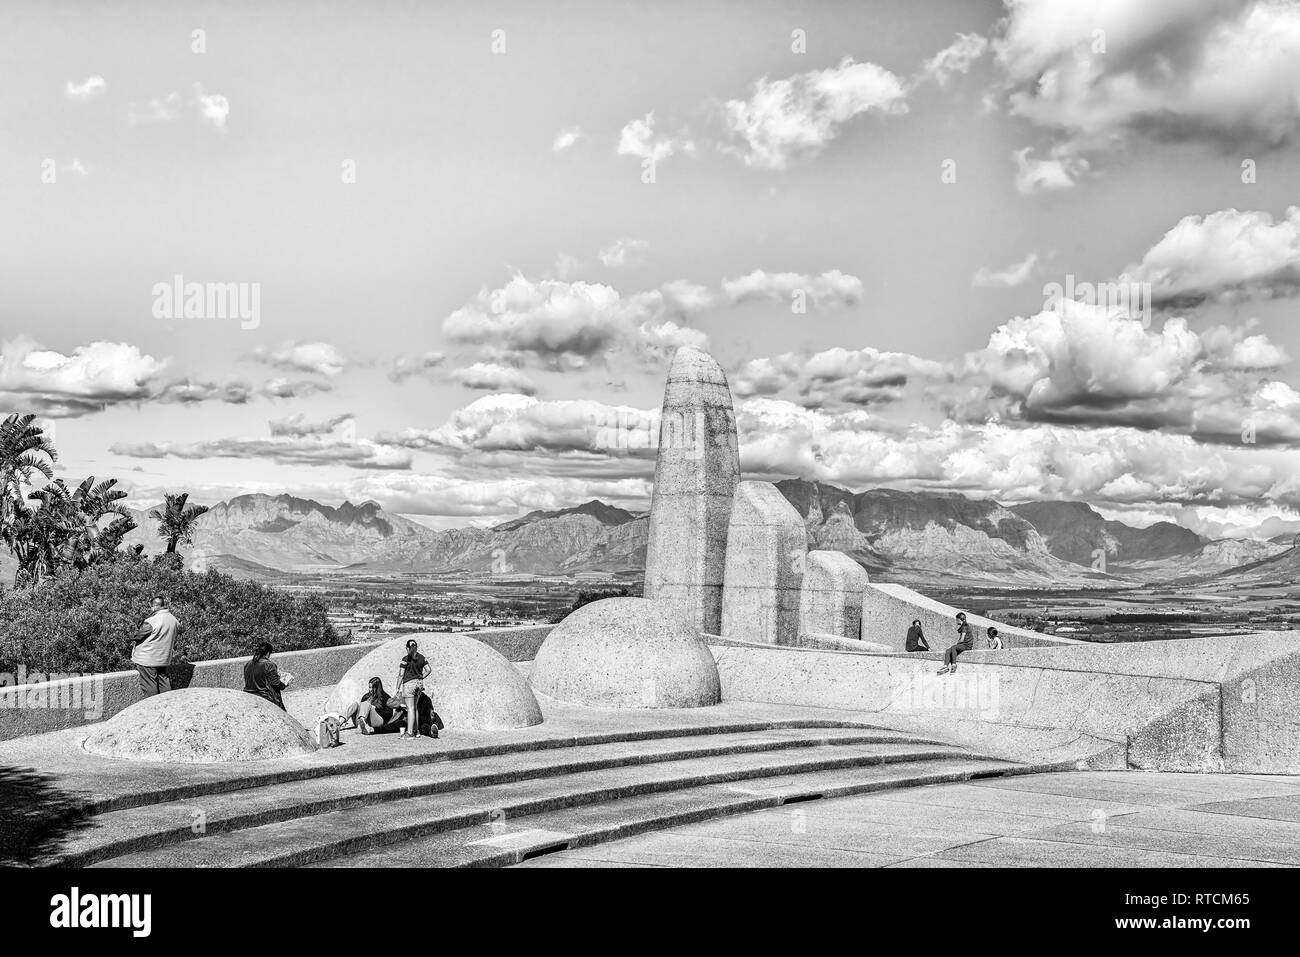 PAARL, SOUTH AFRICA, AUGUST 10, 2018: Tourists at the Afrikaans Language Monument at Paarl in the Western Cape Province. Monochrome Stock Photo